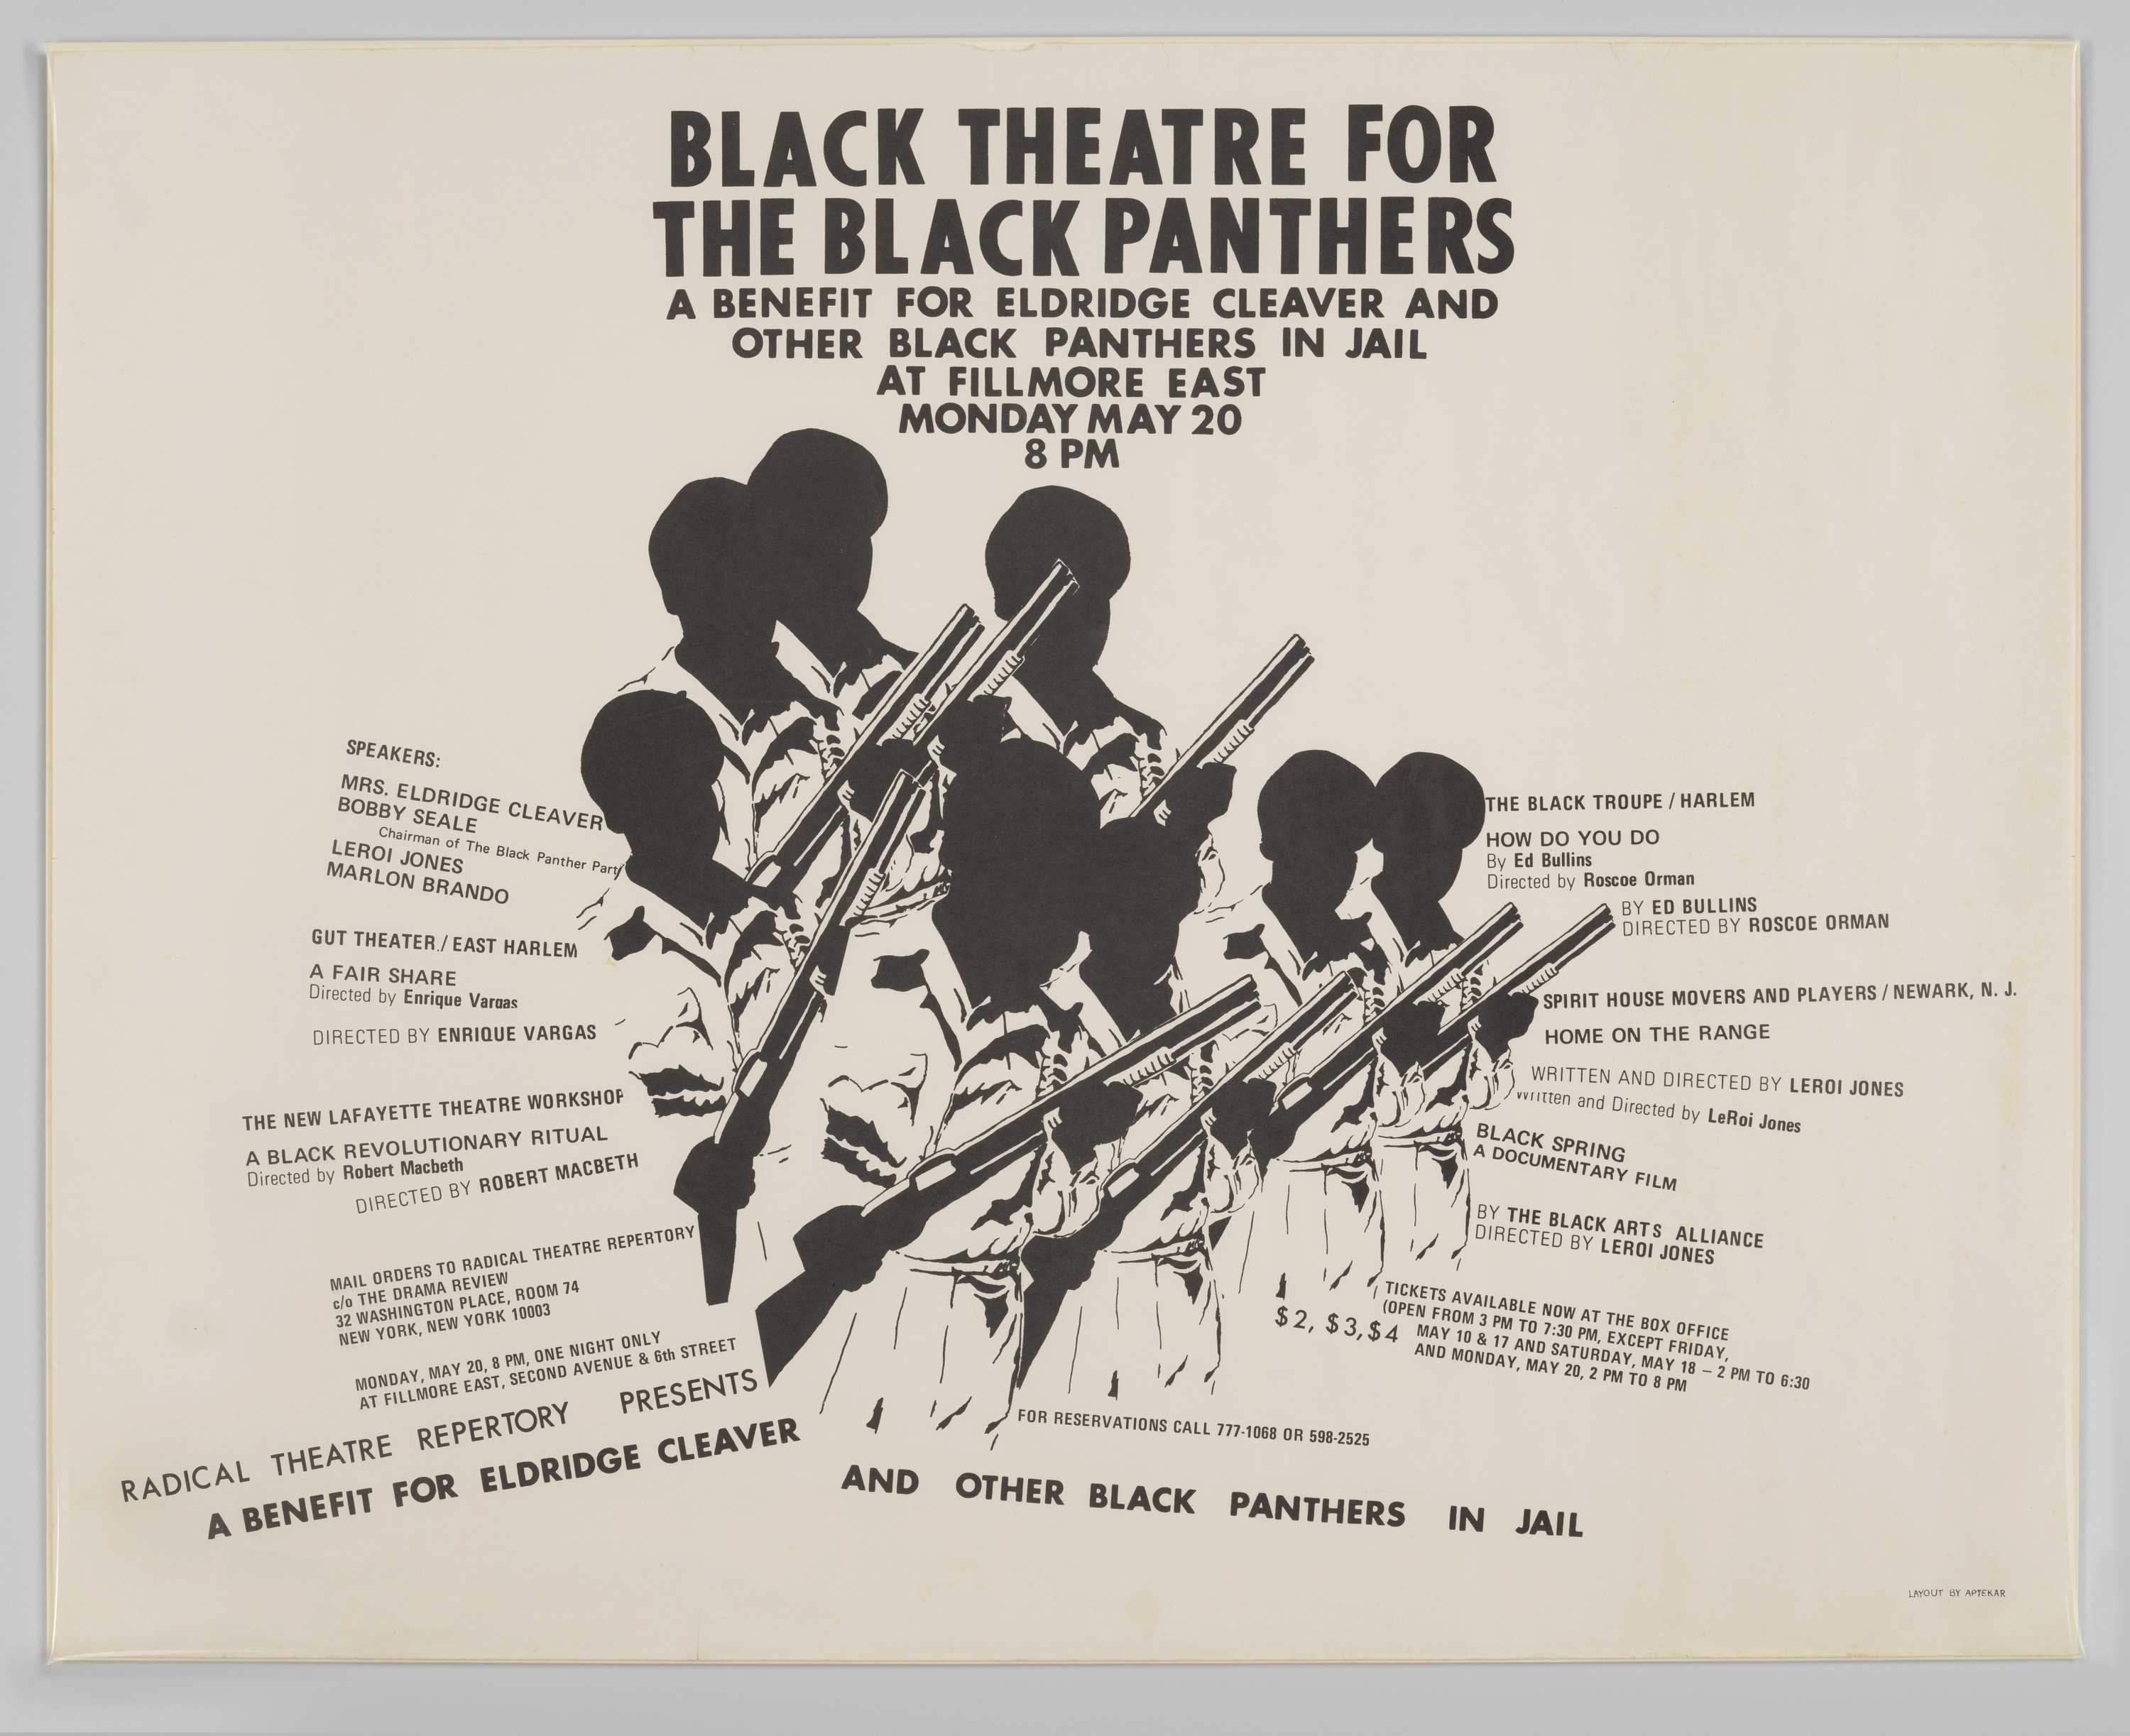 Black and white poster advertising “Black Theatre for the Black Panthers” with outlines of people.